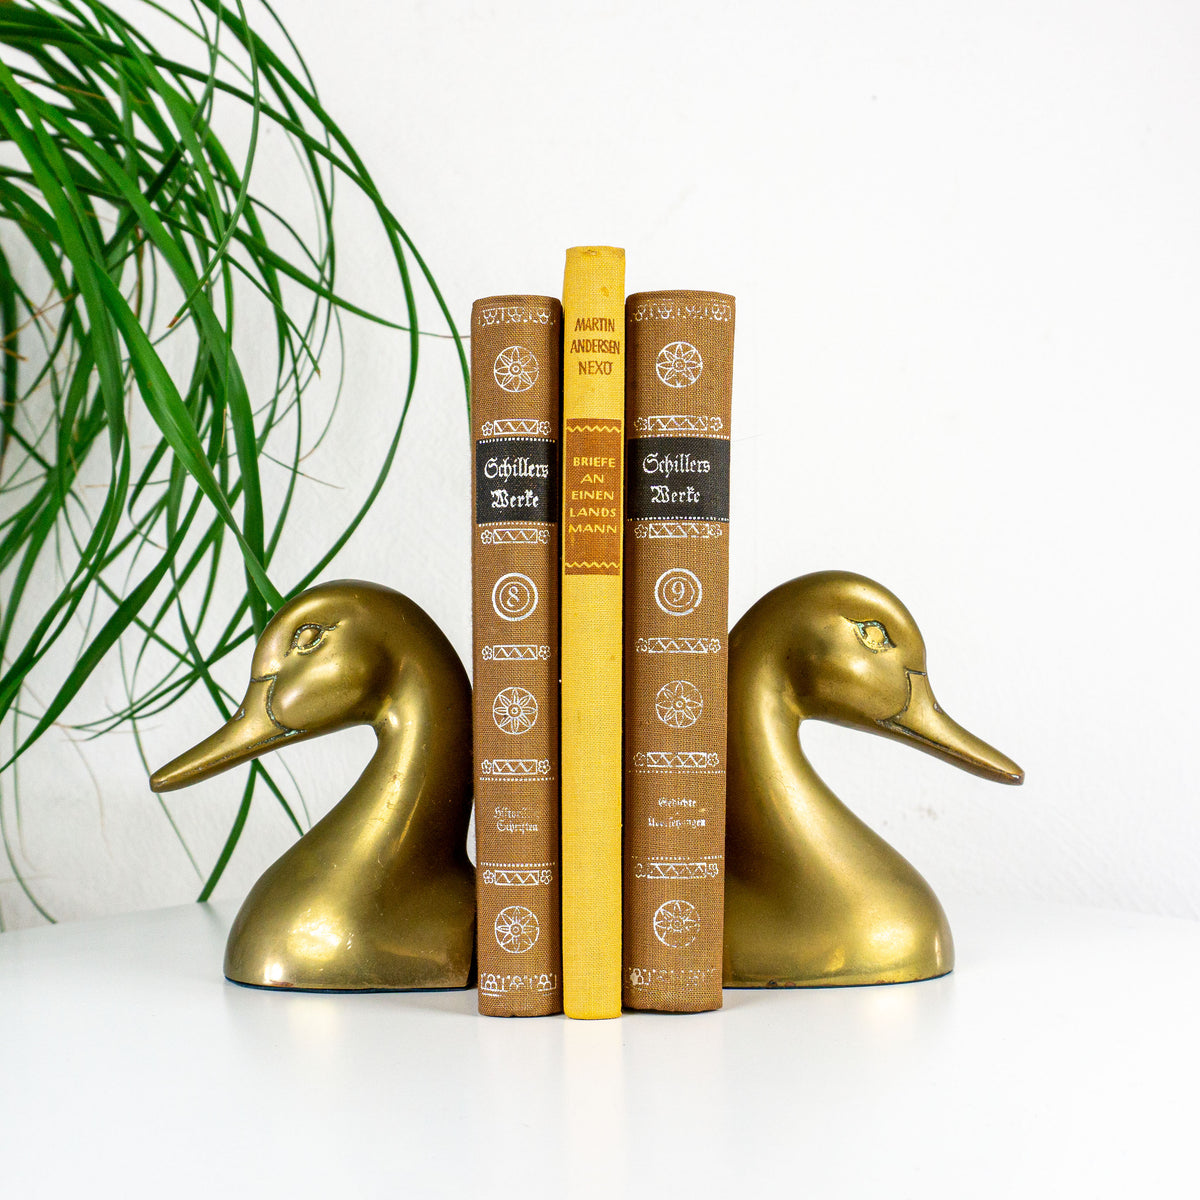 Sold at Auction: 2 PAIR BRASS DUCK HEAD BOOKENDS